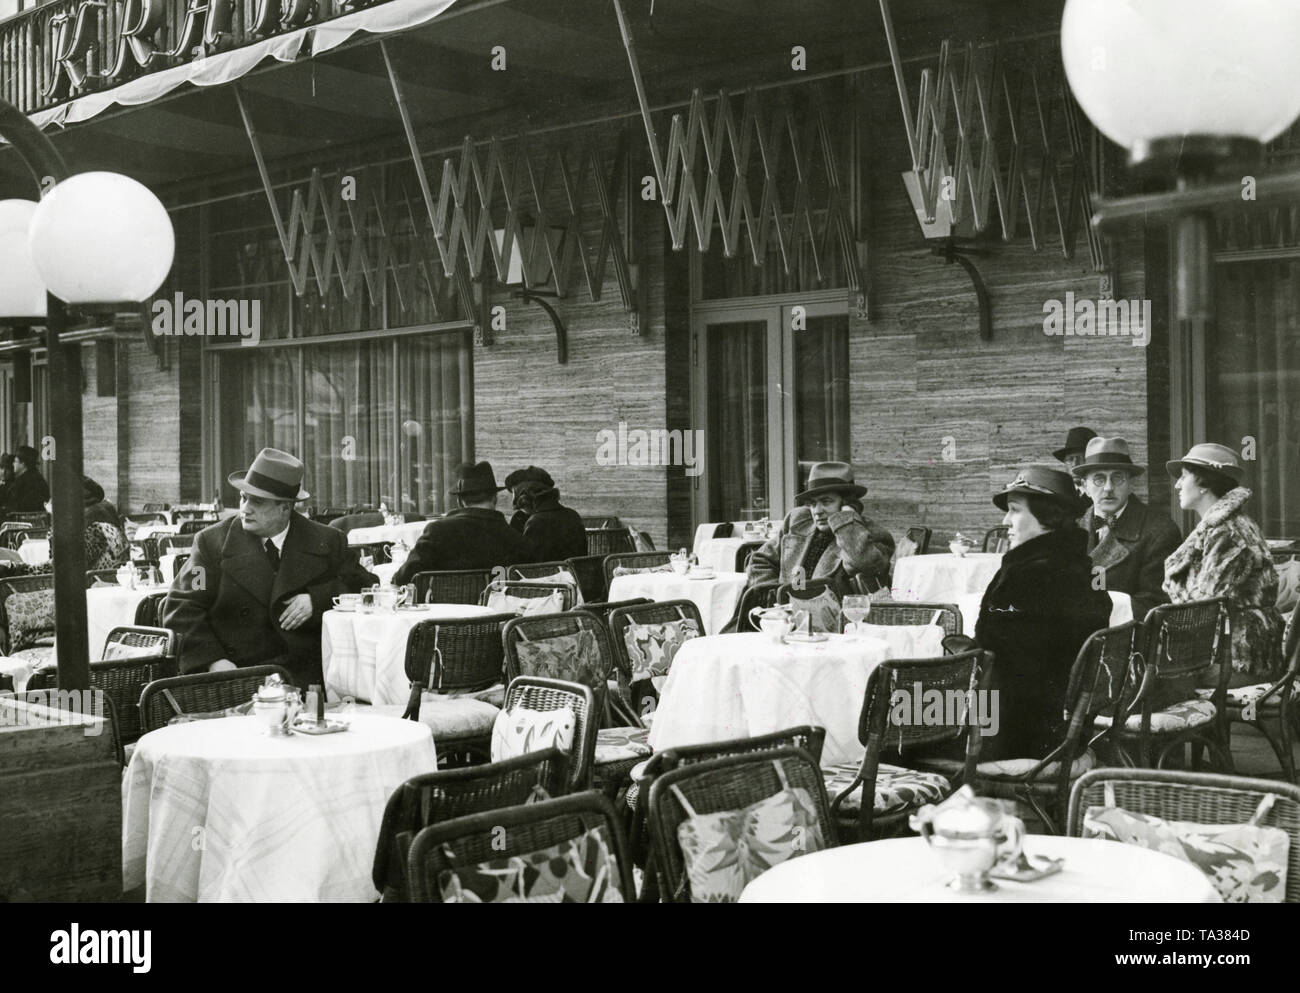 Some guests on the street terrace of the Cafe Kranzler in Berlin. The first  Cafe Kranzler in Berlin was opened in 1825 by Johann Georg Kranzler as a  small pastry shop in